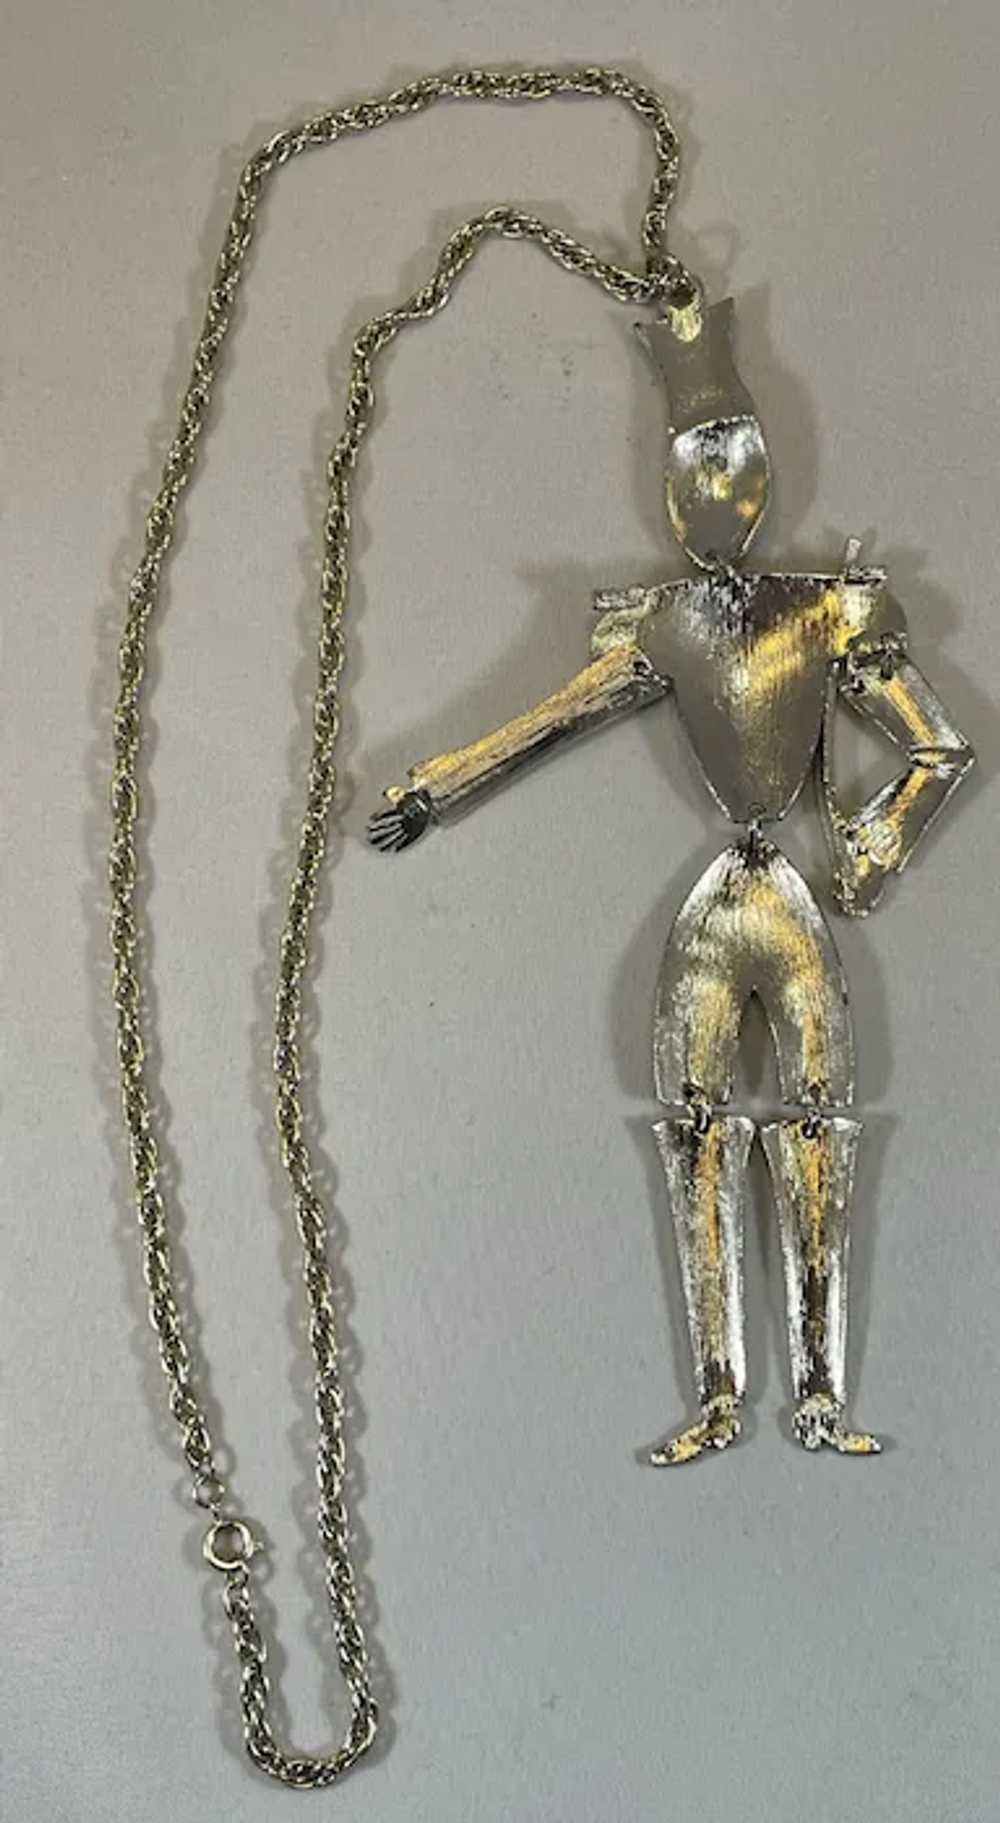 Whimsical Silver Tone Jointed Soldier Necklace - image 3